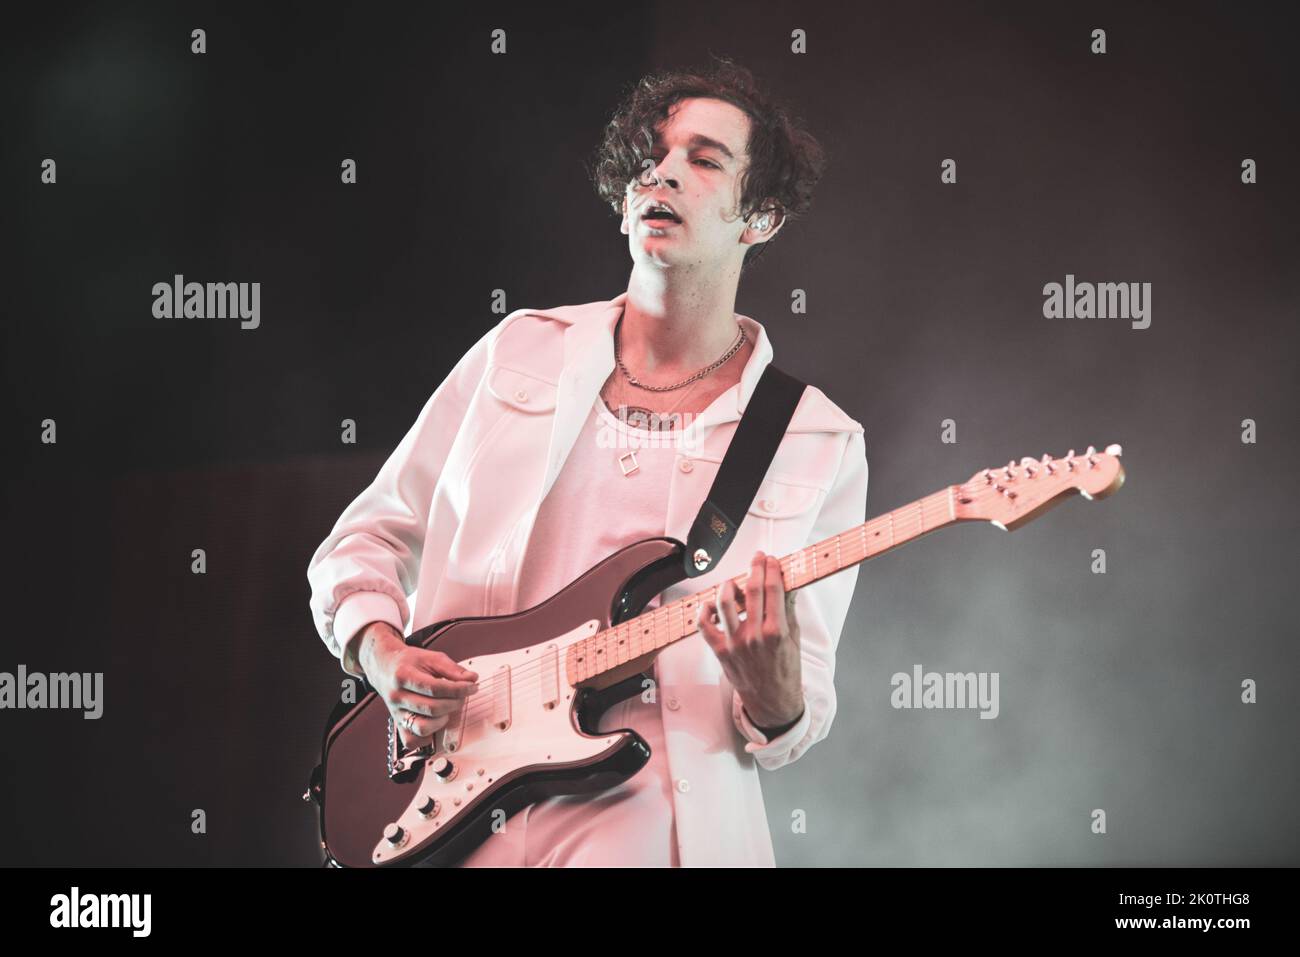 GERMANY, NUREMBERG, ROCK IM PARK 2016: Matty Healy, singer of the English pop rock band, performing live on stage at the Rock Im Park festival 2016 edition Stock Photo